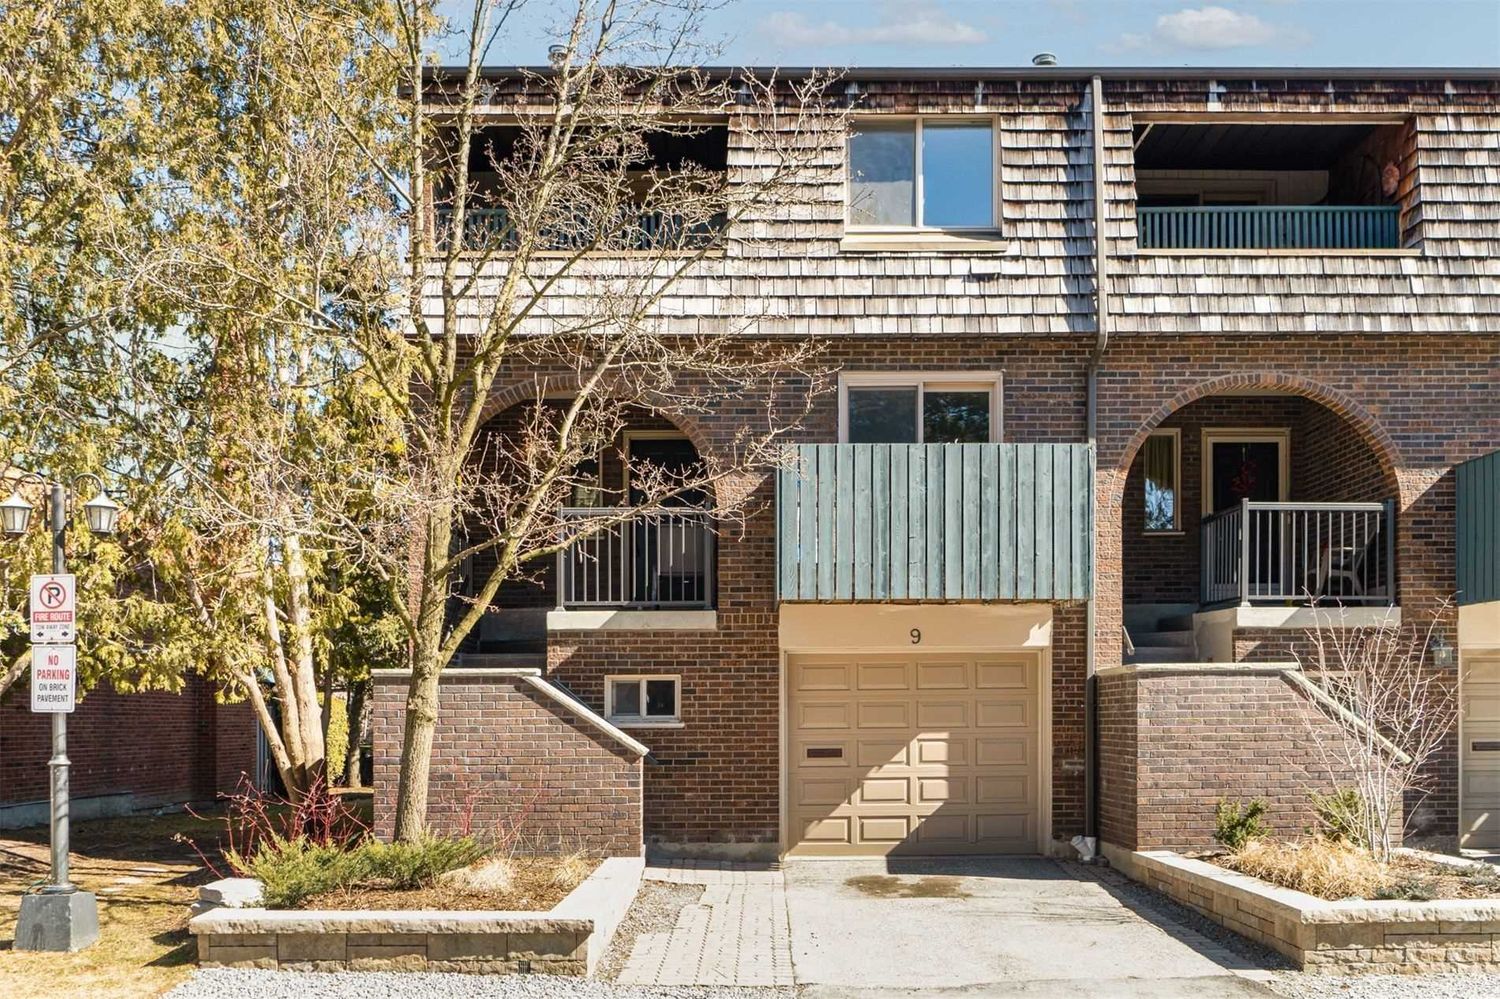 1-100 Cricklewood Crescent. Cricklewood Estates Townhomes is located in  Markham, Toronto - image #2 of 2